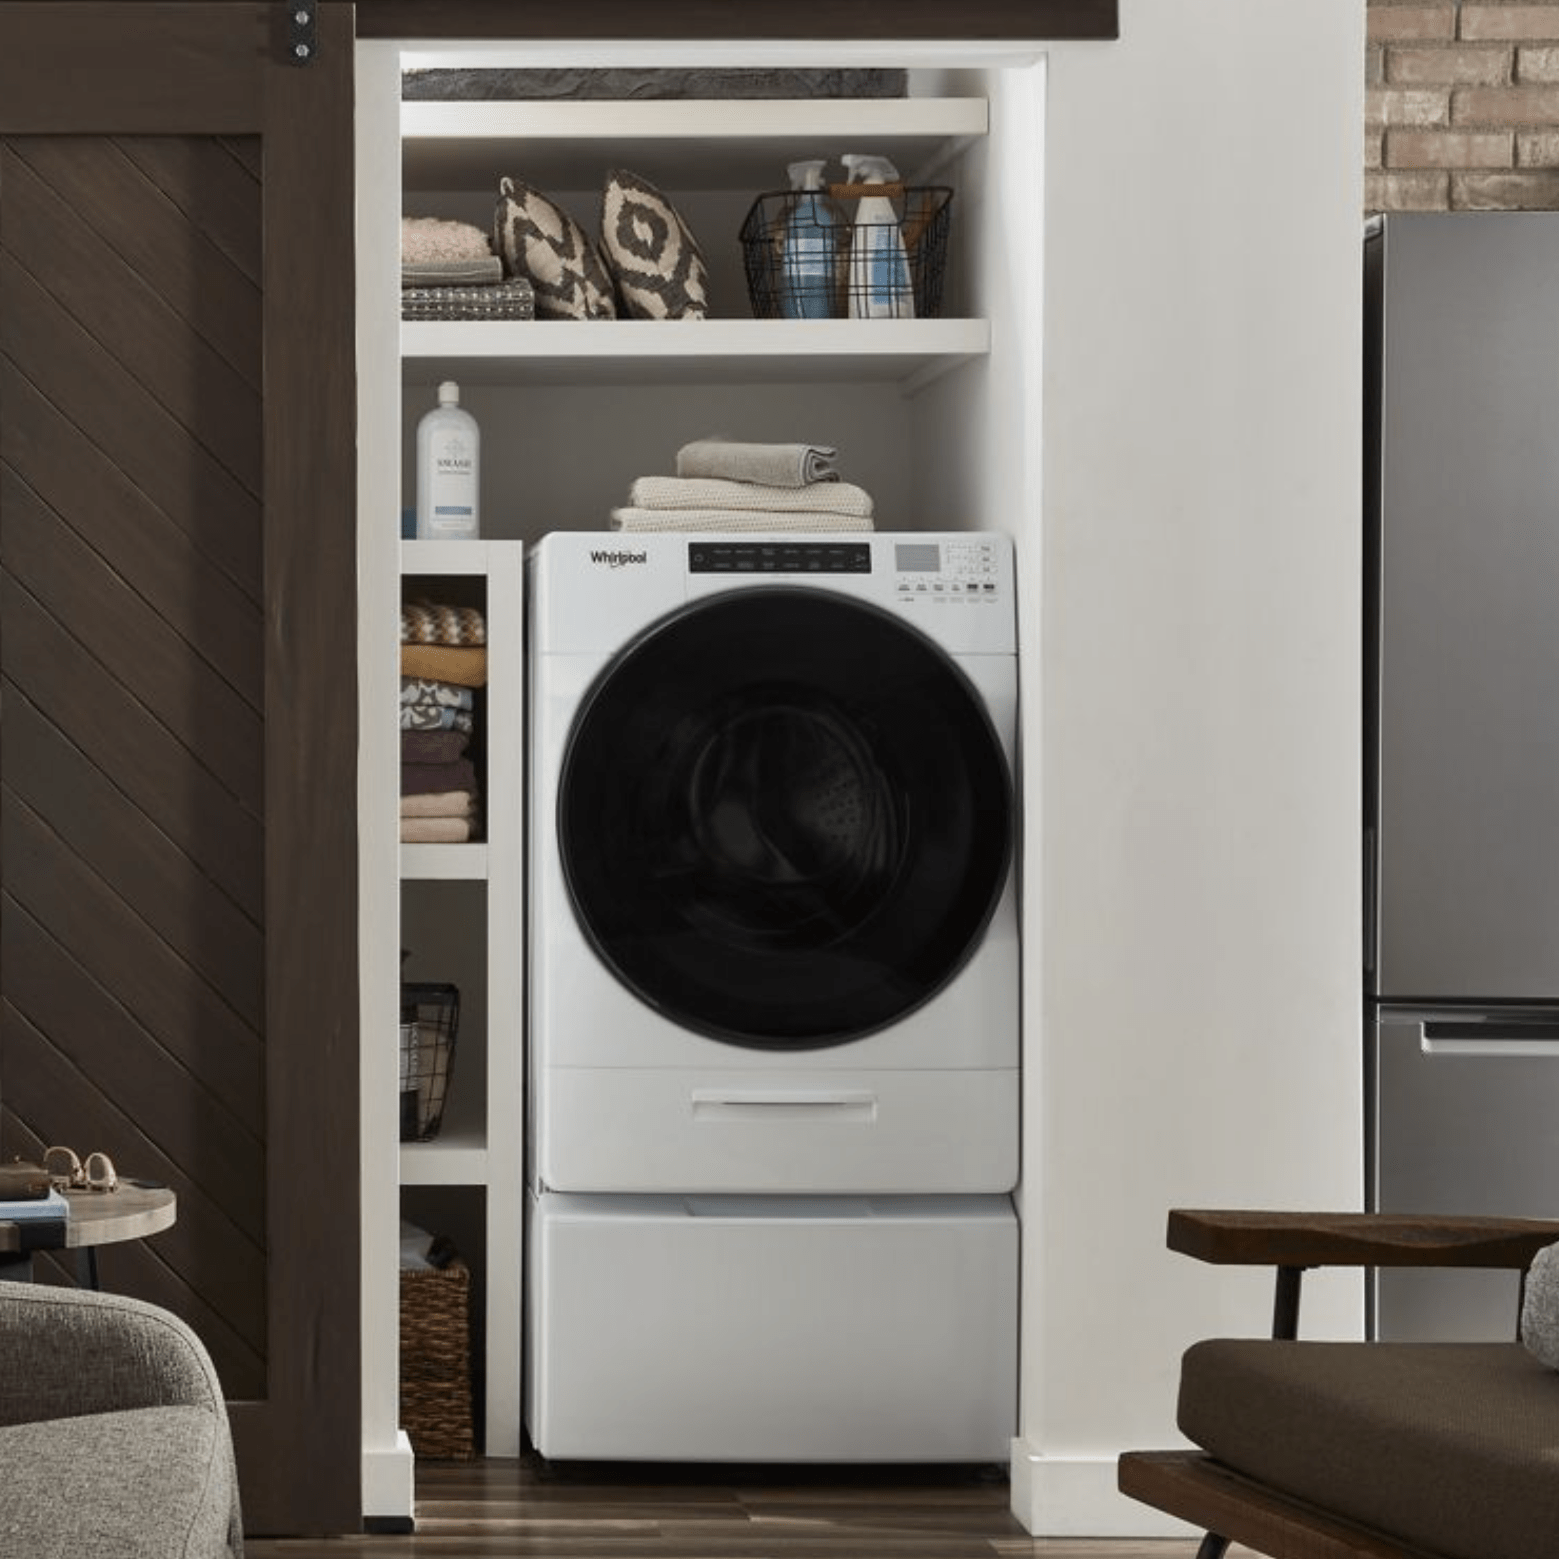 Ventless All In One Washer Dryer Via Whirlpool